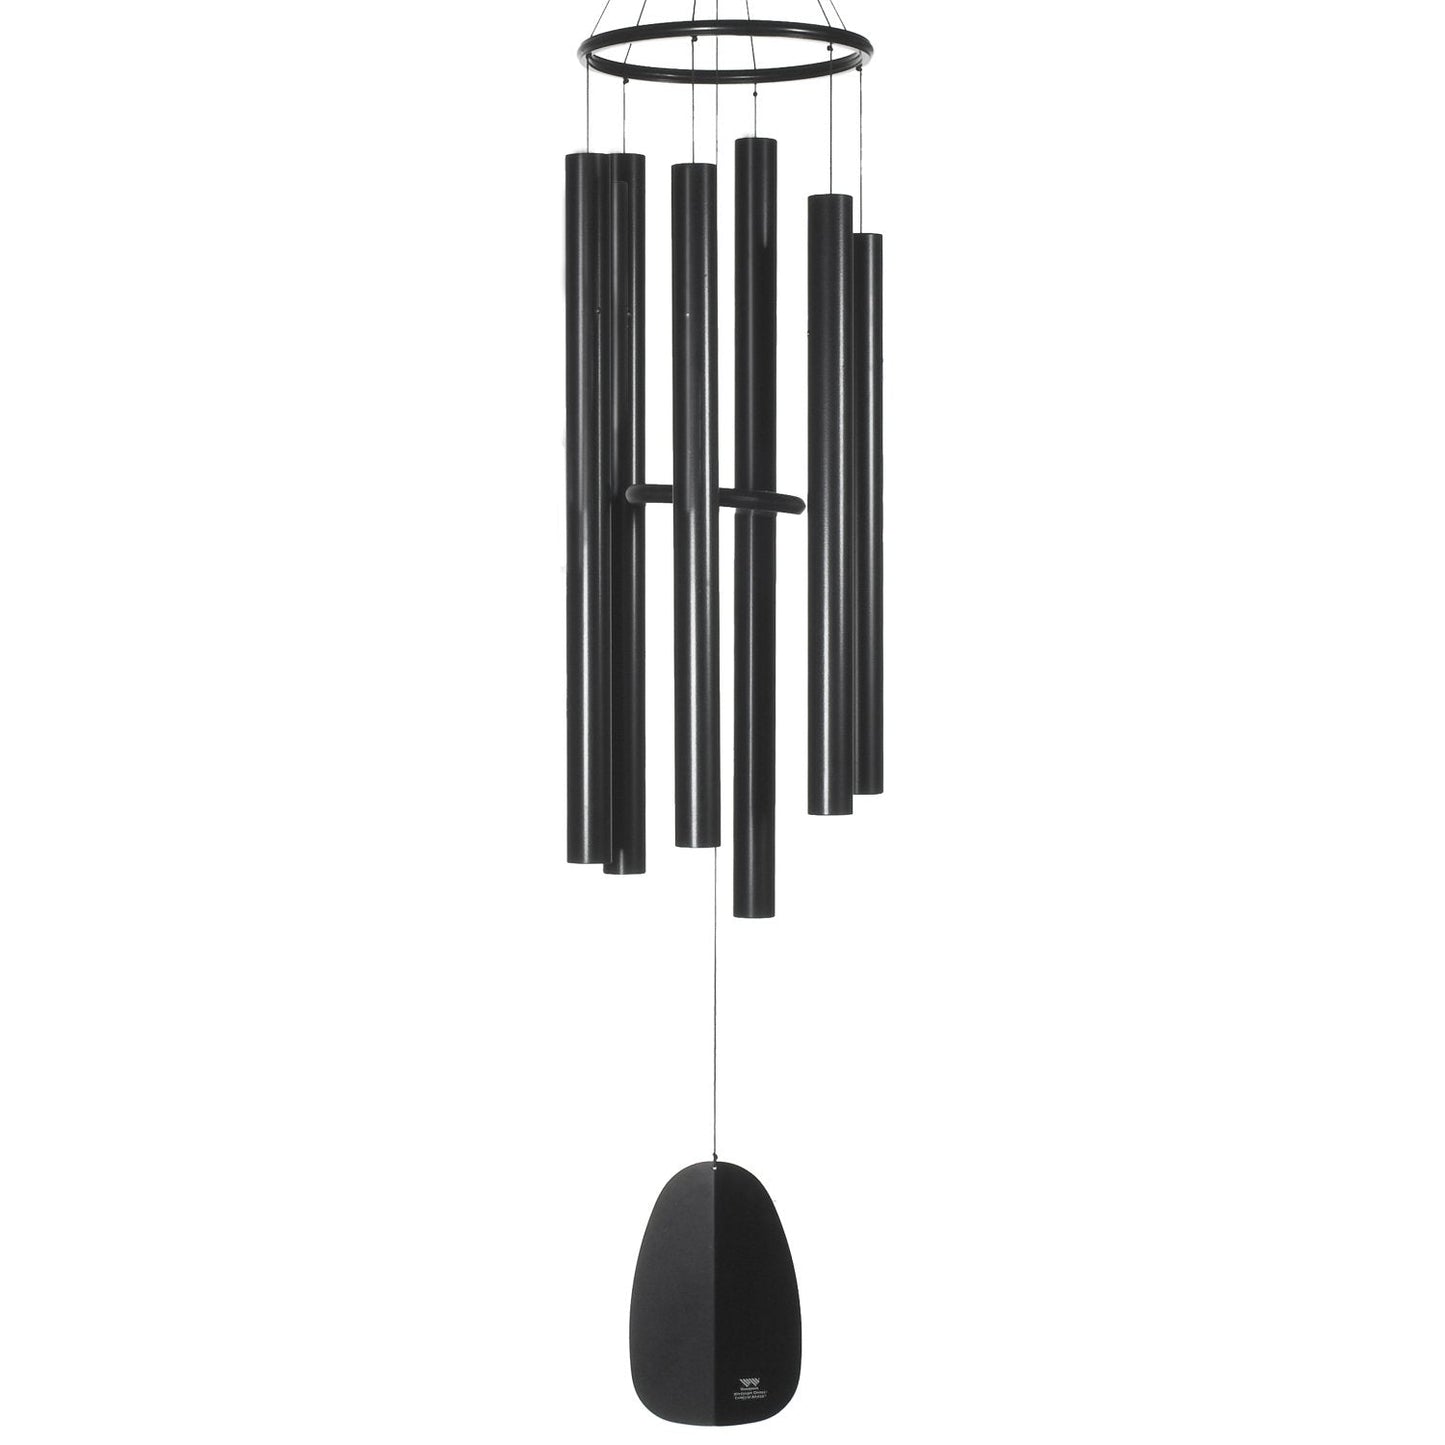 Windsinger Chimes of Apollo™ - Black - by Woodstock Chimes